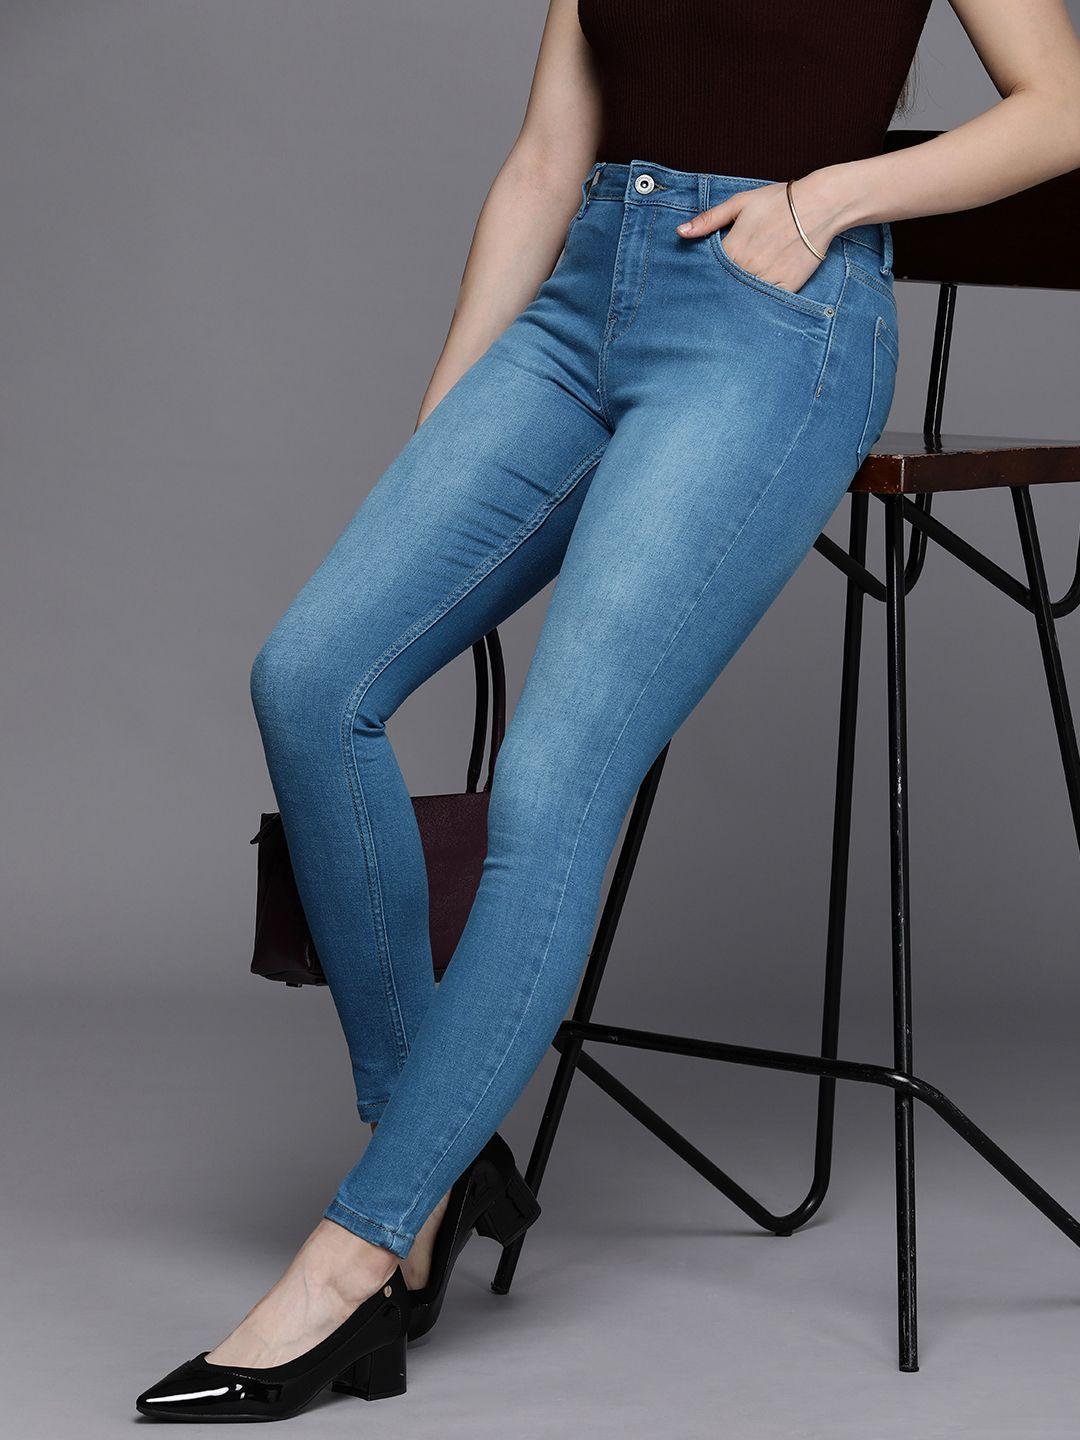 kenneth-cole-women-skinny-fit-high-rise-light-fade-stretchable-jeans